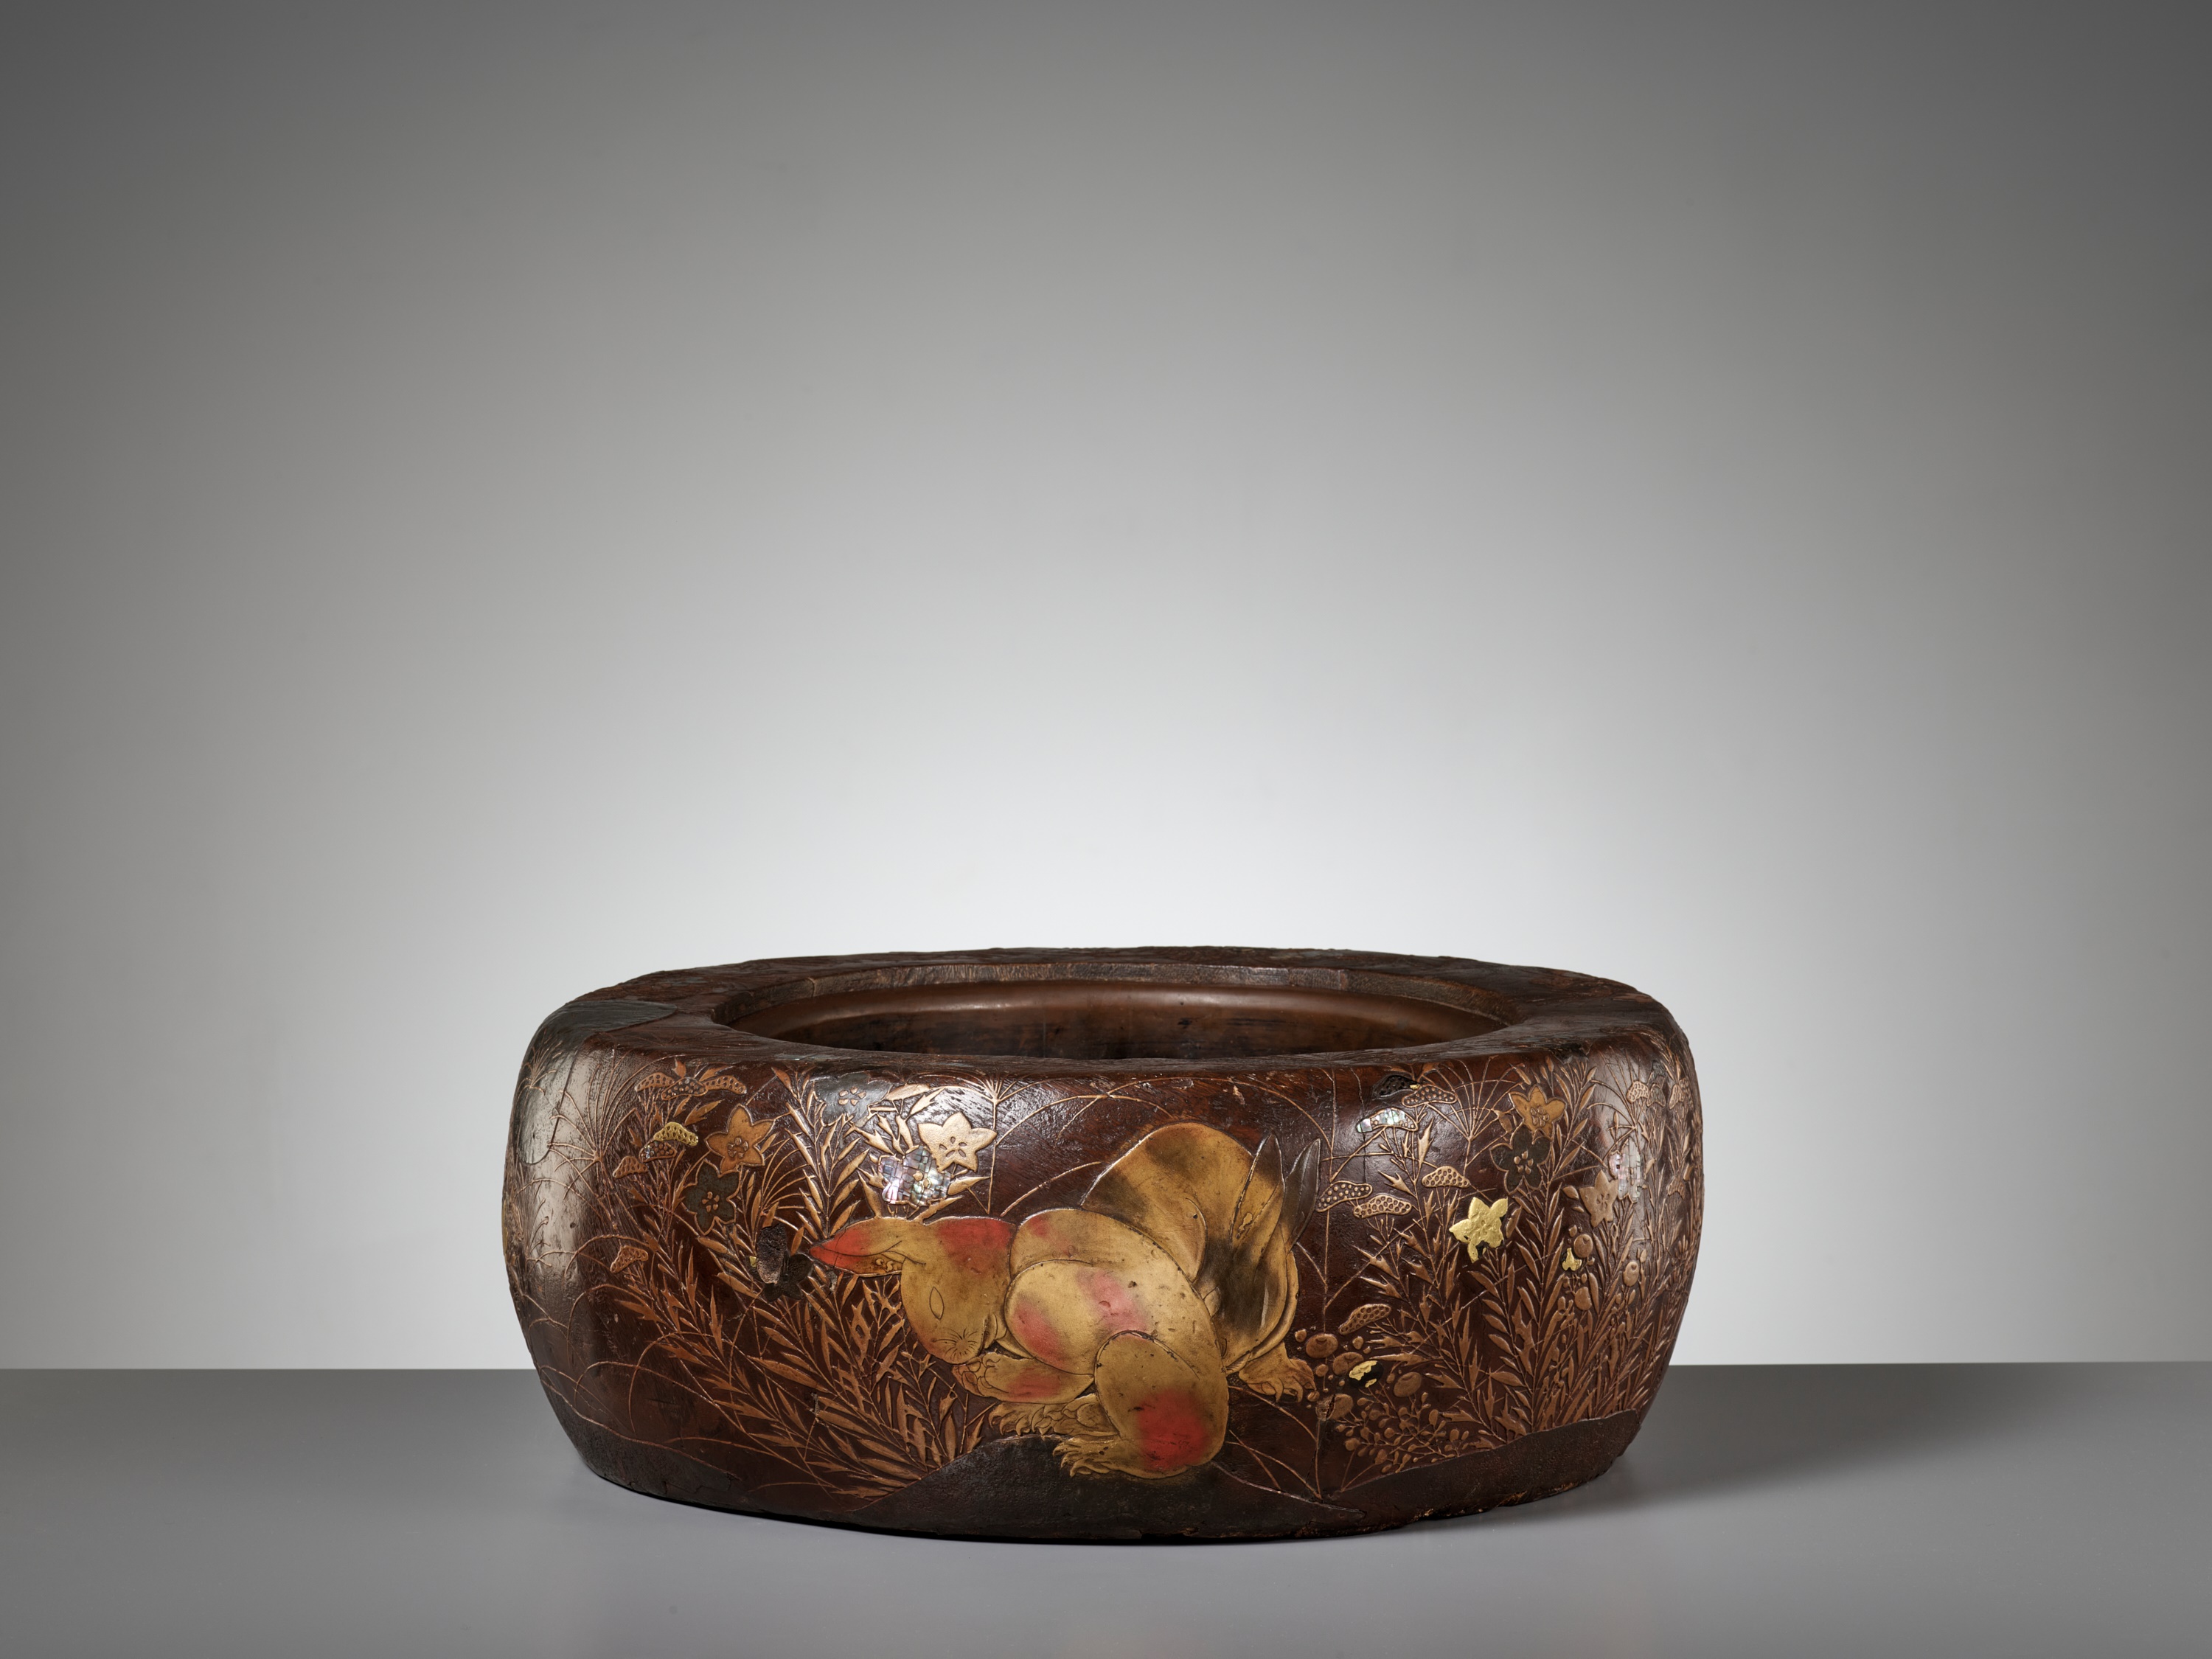 A LARGE RIMPA STYLE LACQUERED AND INLAID PAULOWNIA WOOD HIBACHI (BRAZIER) WITH LUNAR HARES - Image 9 of 14